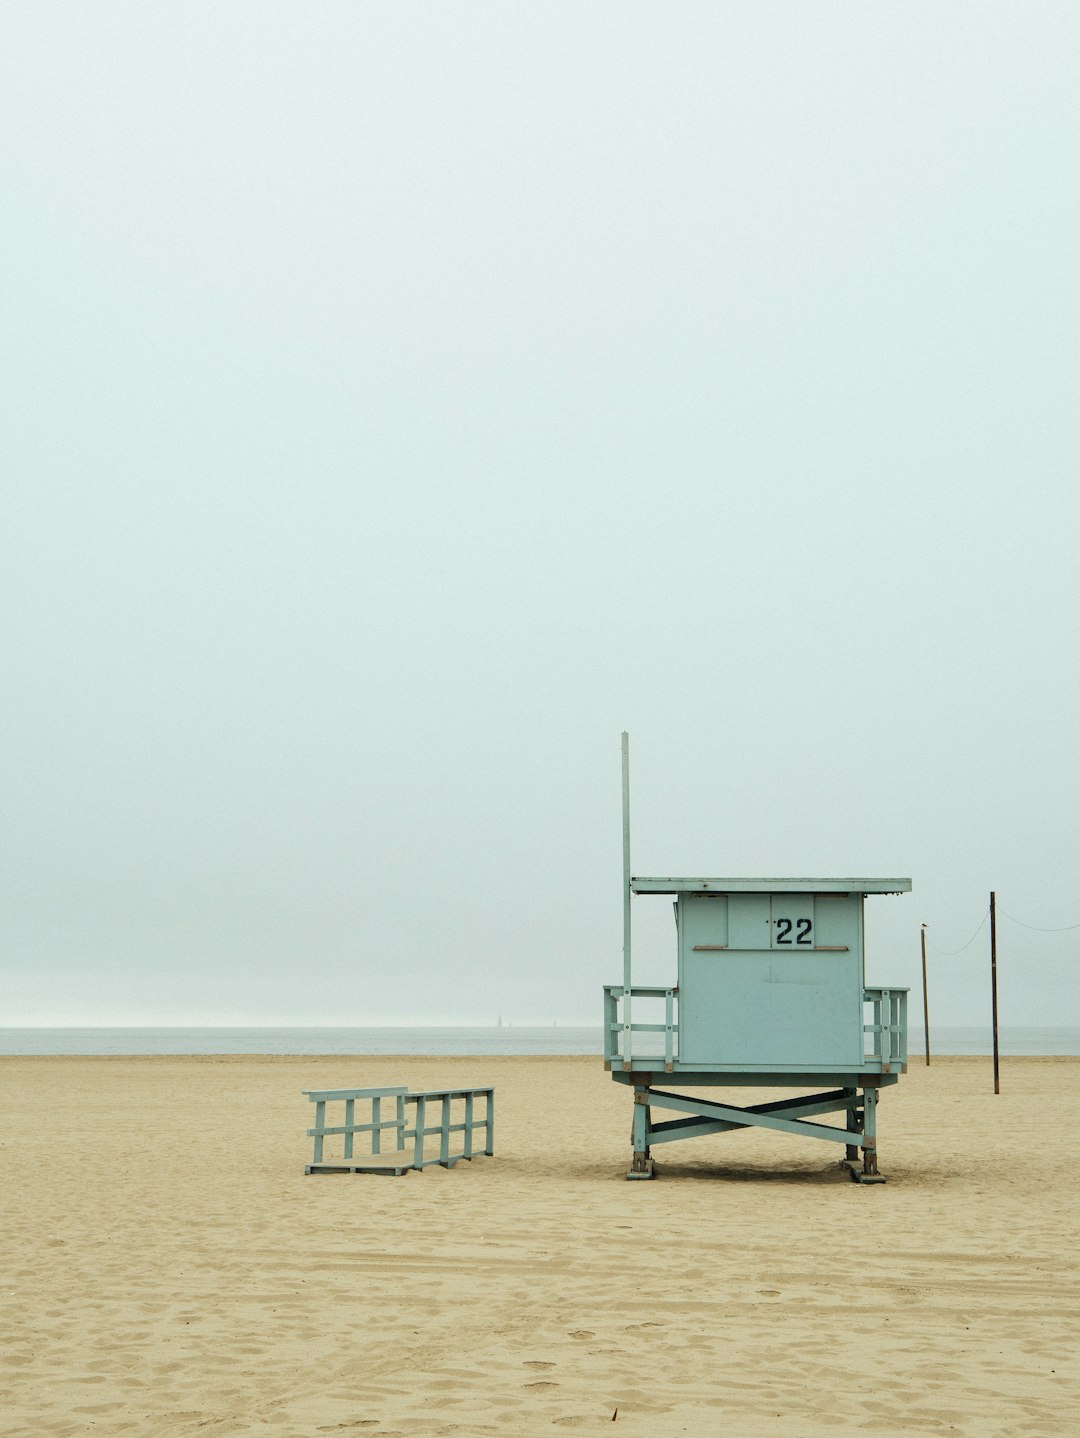 Travel Tips and Stories of Santa Monica Beach in United States